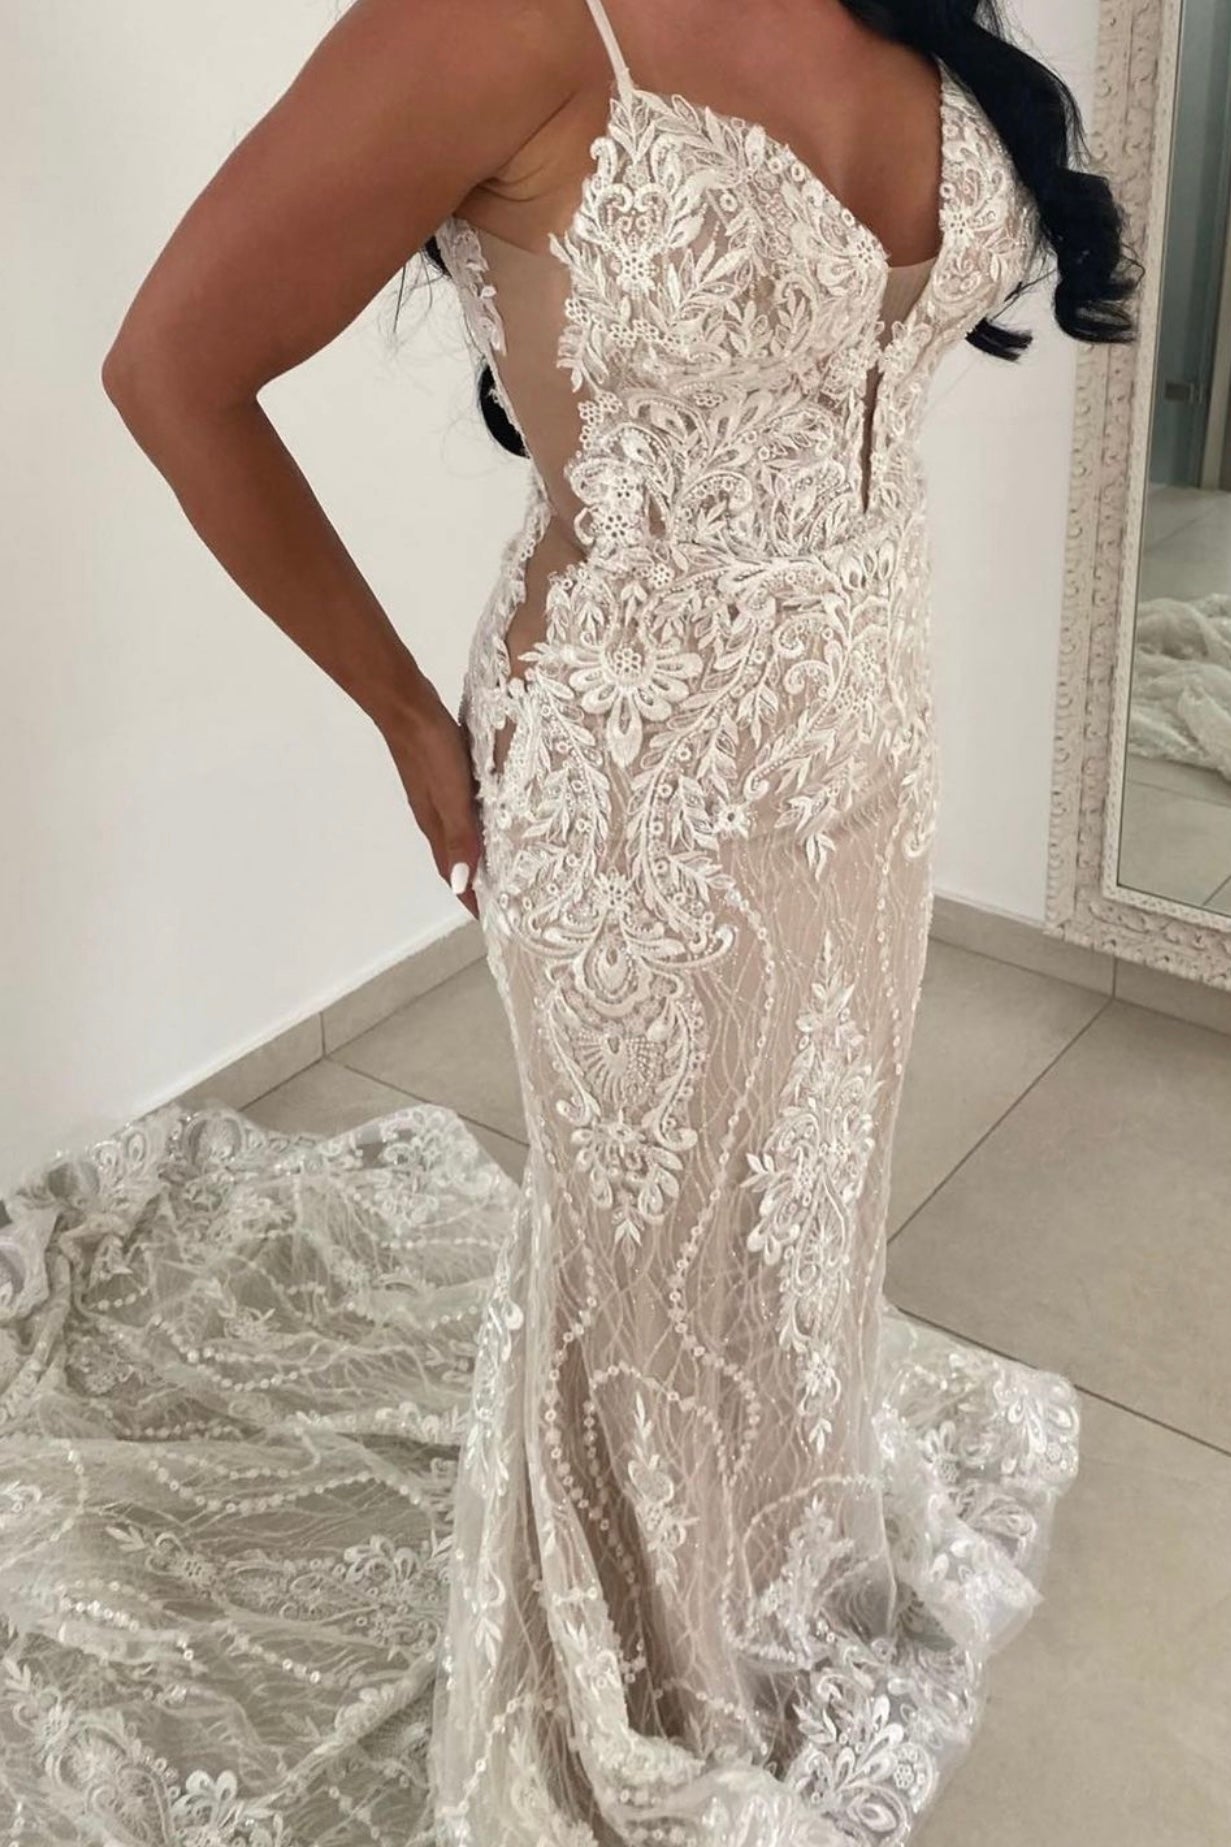 The intricate lace design and fit of this dress is unmatched. The low sheer sides and deep V lace neckline add the perfect touch of elegance. The Clenet Gown by Rene Atelier